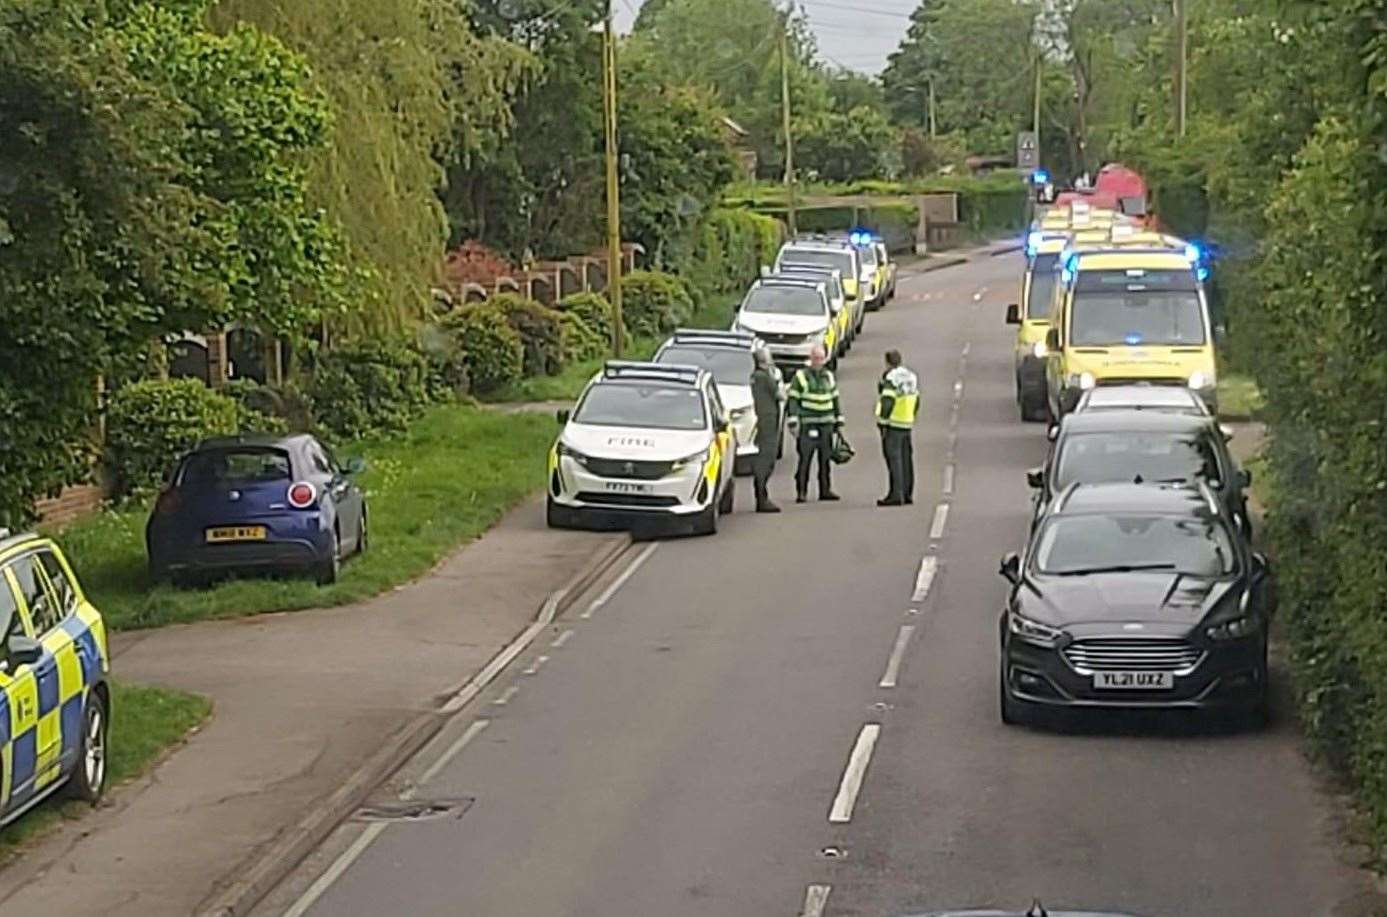 Several police and ambulance cars were sent to the scene at around 3.25pm. Picture: John Dalton